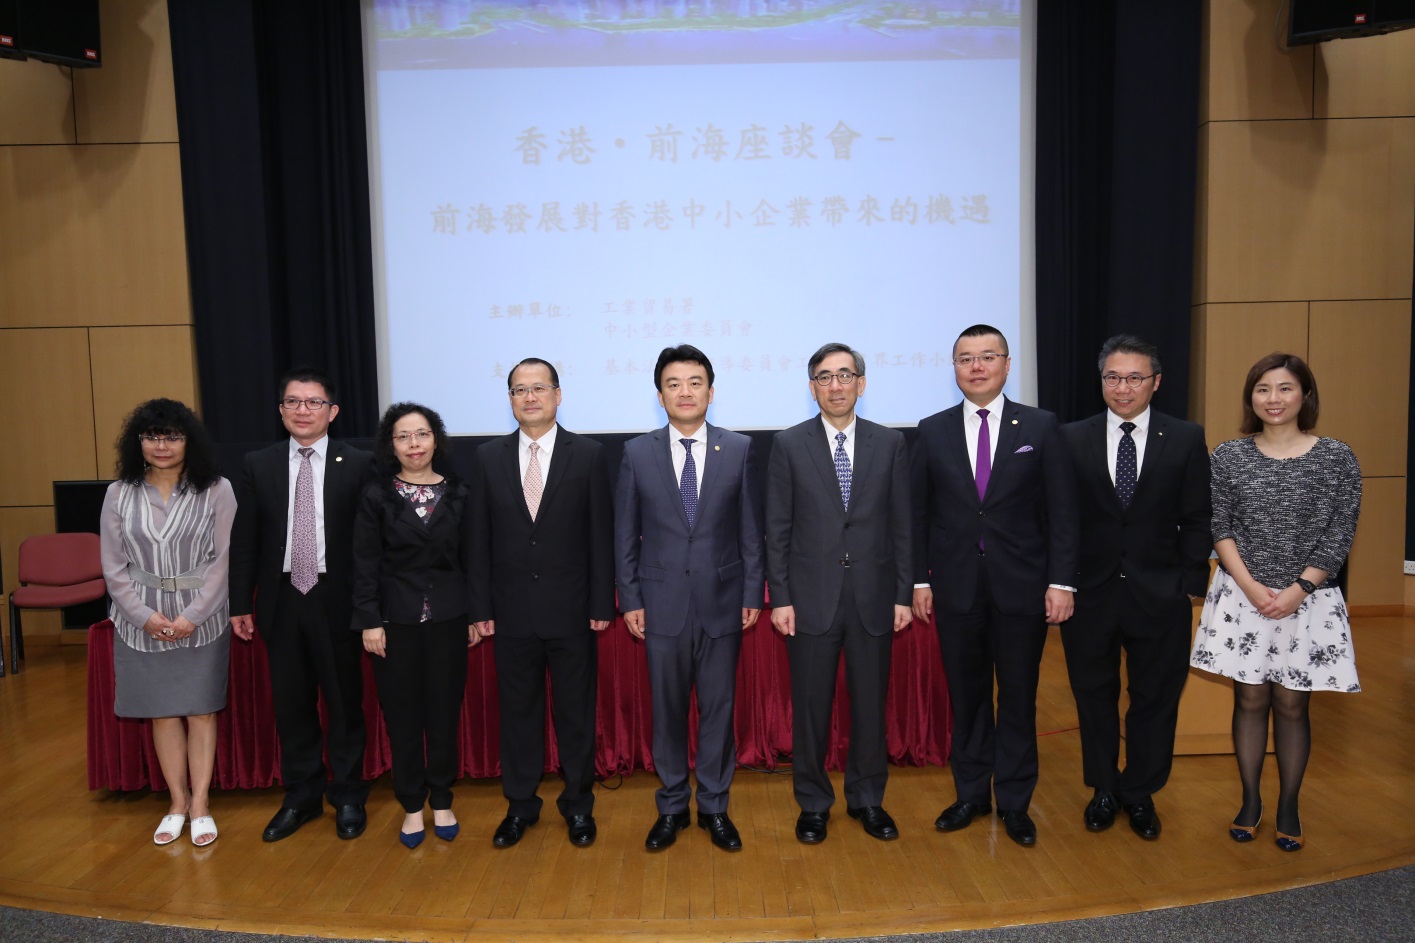 Photo 10 : The Small and Medium Enterprises Committee (SMEC) conducted the "Hong Kong – Qianhai Seminar on the Opportunities to Hong Kong Small and Medium Enterprises brought by the Development of Qianhai" on 28 April 2015.  At the Seminar, the Director-General of the Authority of Qianhai Shenzhen-Hong Kong Modern Service Industry Cooperation Zone of Shenzhen, Mr. Zhang Bei, and other representatives introduced the investment policies and preferential treatment of Qianhai, things to note for investing in Qianhai, as well as the Qianhai Shenzhen-Hong Kong Youth Innovation and Entrepreneur Hub, to over 100 representatives from around 40 local SME organisations, major business associations, trade and industrial organisations and professional bodies.